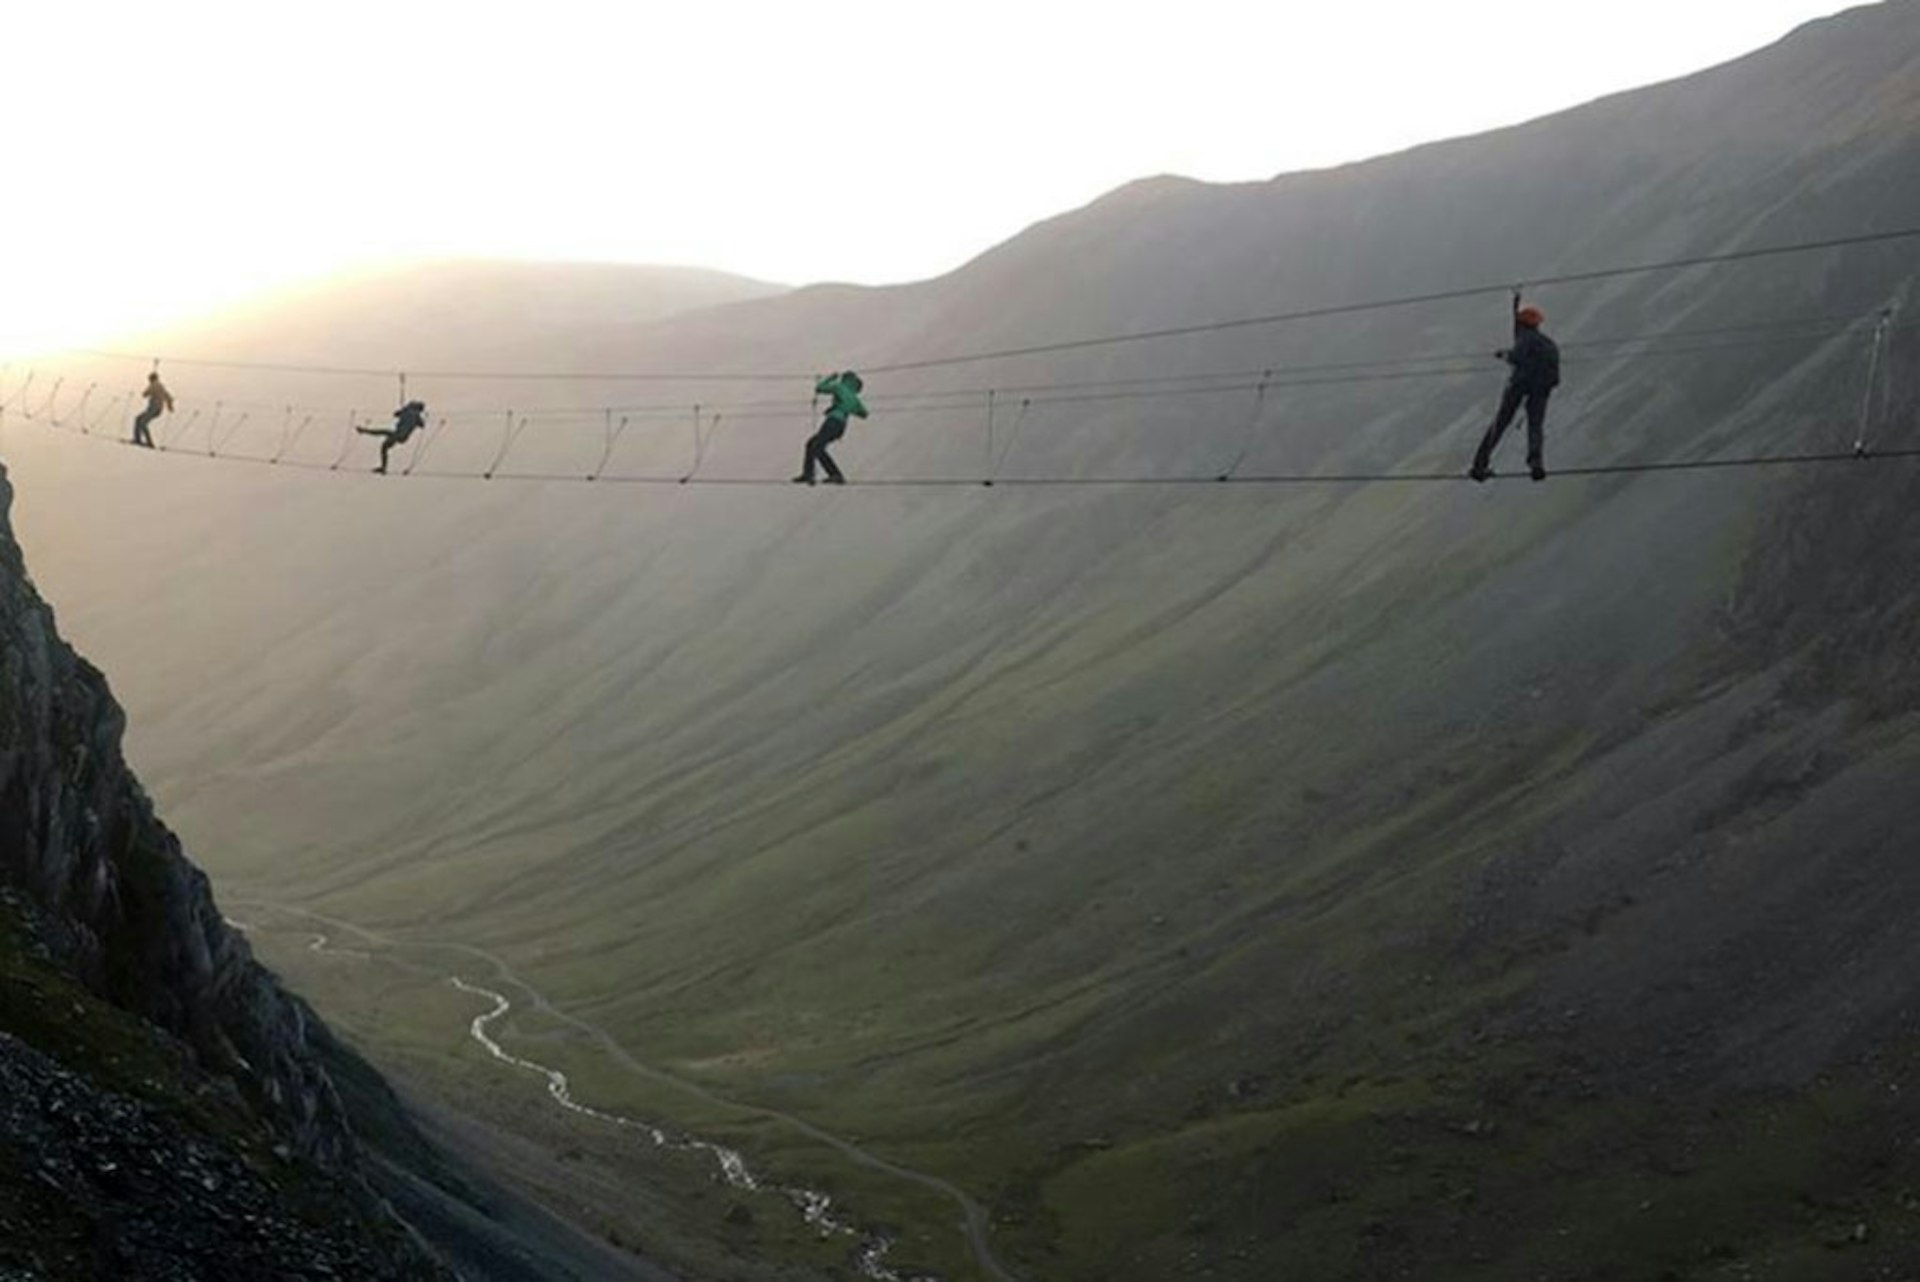 People crossing the Infinity Bridge at Honister in Cumbria